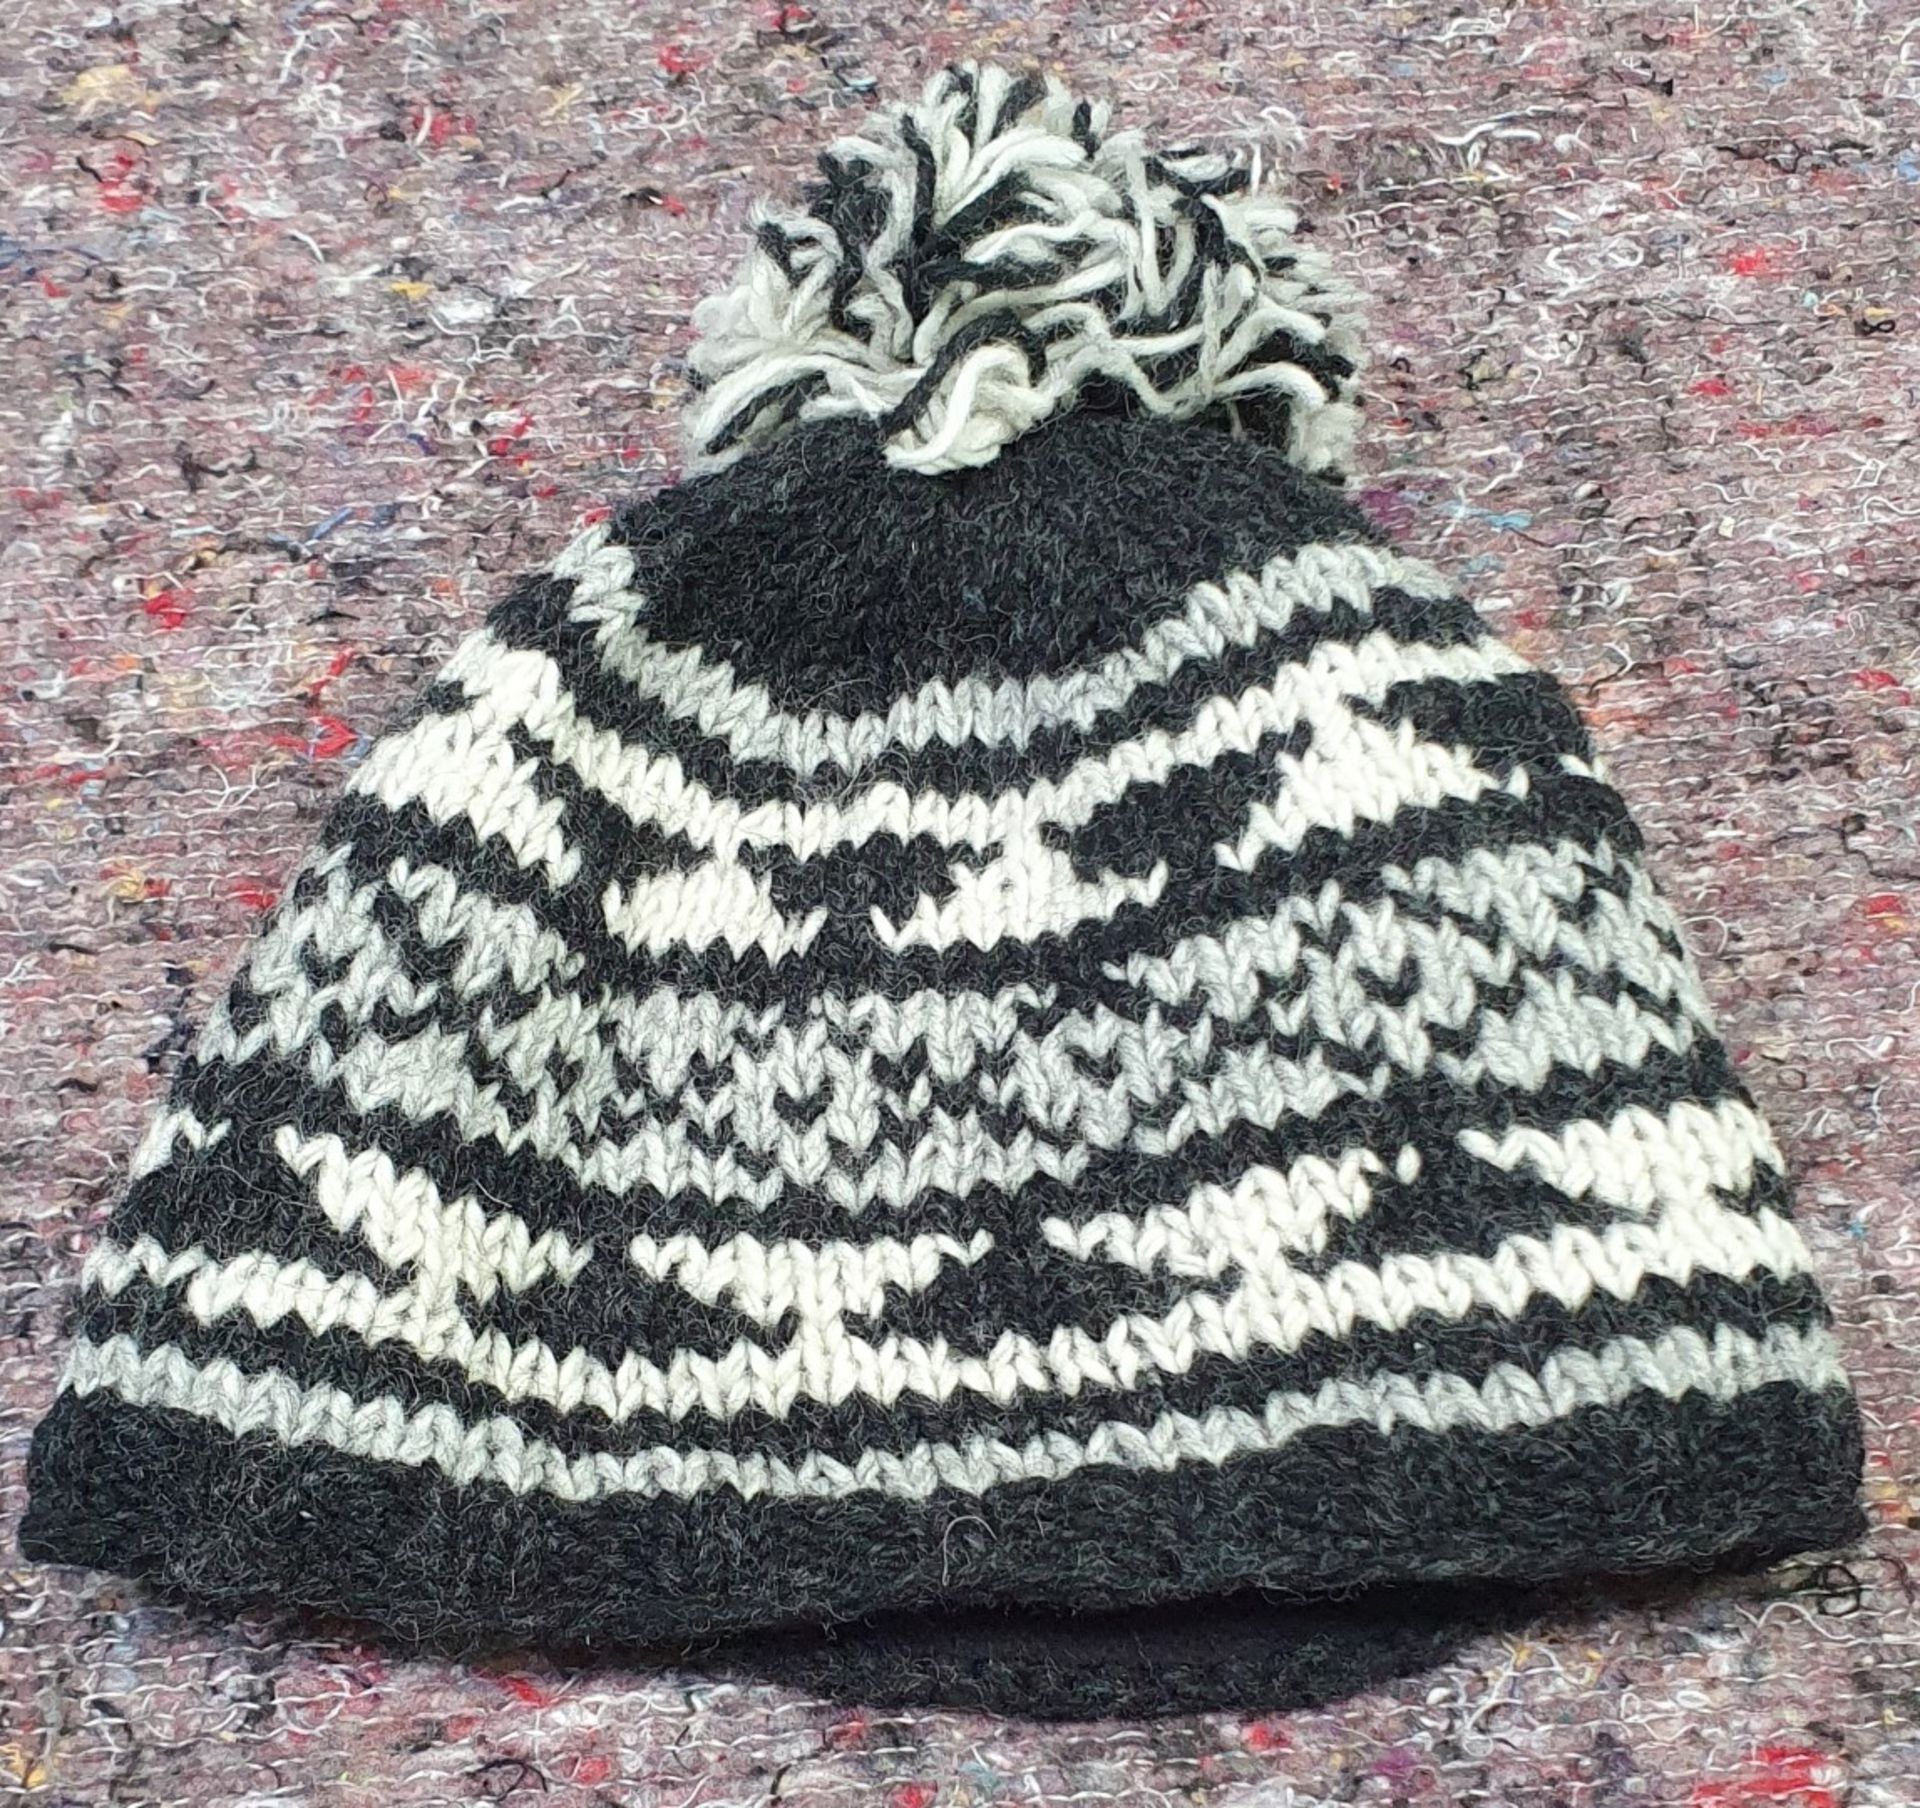 13 x Assorted Bobble Hats and Woolly Gloves by From The Source - New Stock - Ref: TCH236 - CL840 - - Image 8 of 24